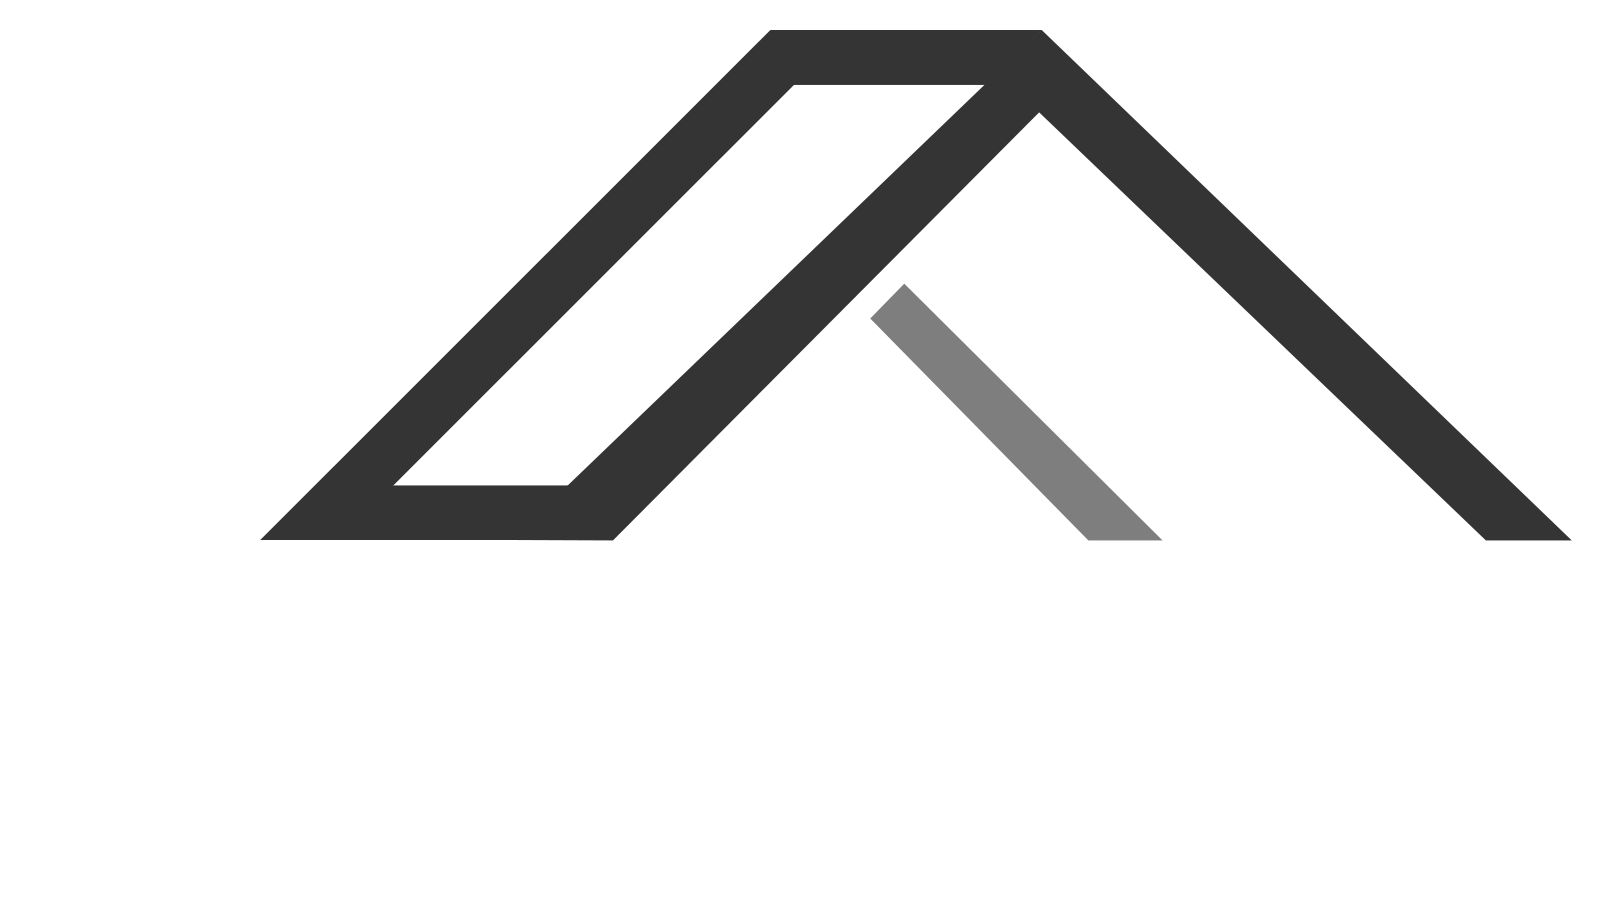 flat roofing specialists in Loughborough